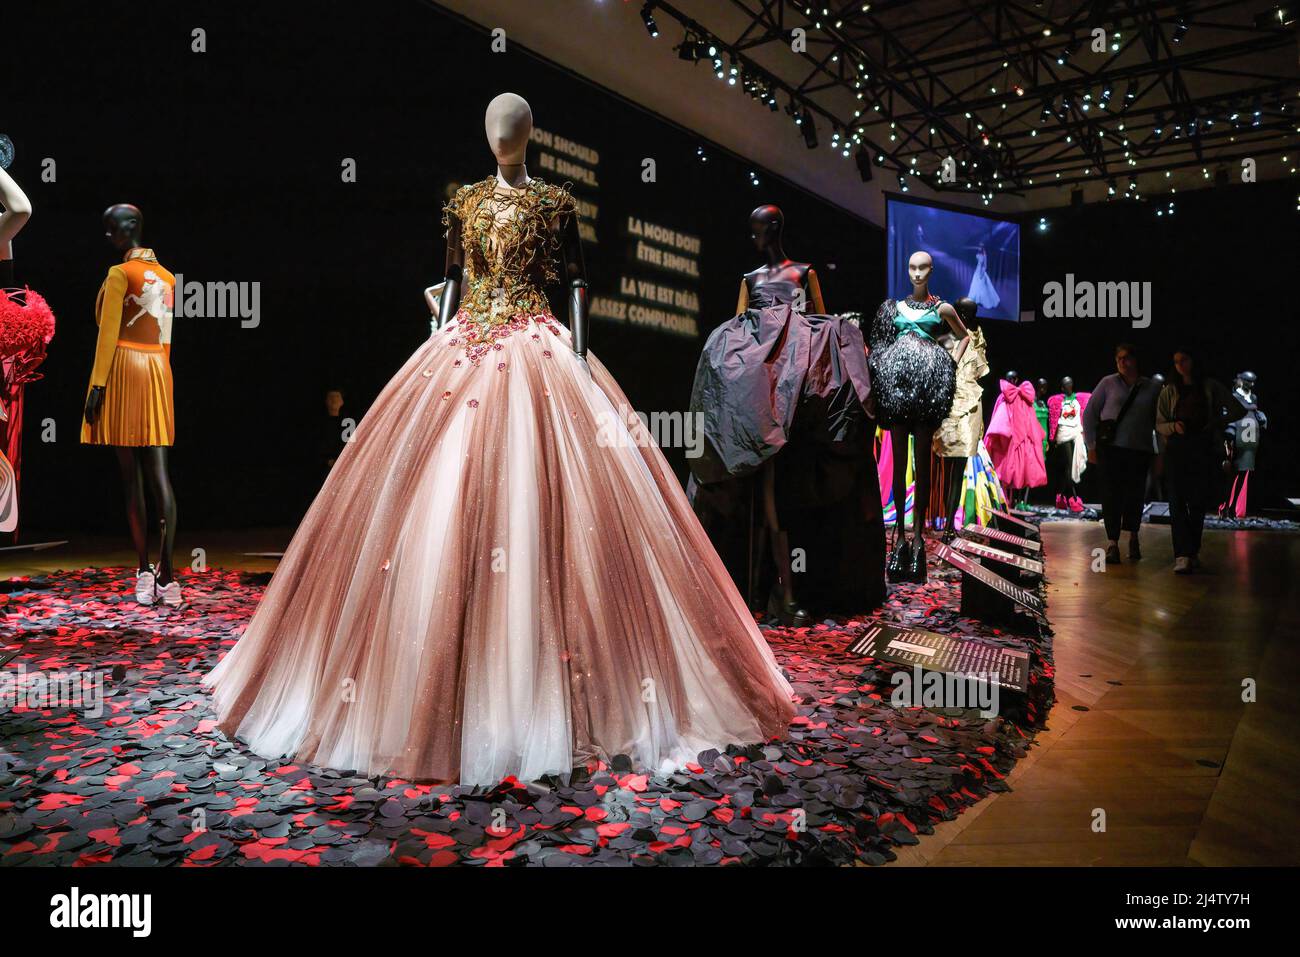 Paris, France. 13th Apr, 2022. Designer dress by Balenciaga is exhibited  during the Love Brings Love exhibition at the Palais Galliera museum. The  Palais Galliera also called the Fashion Museum of the